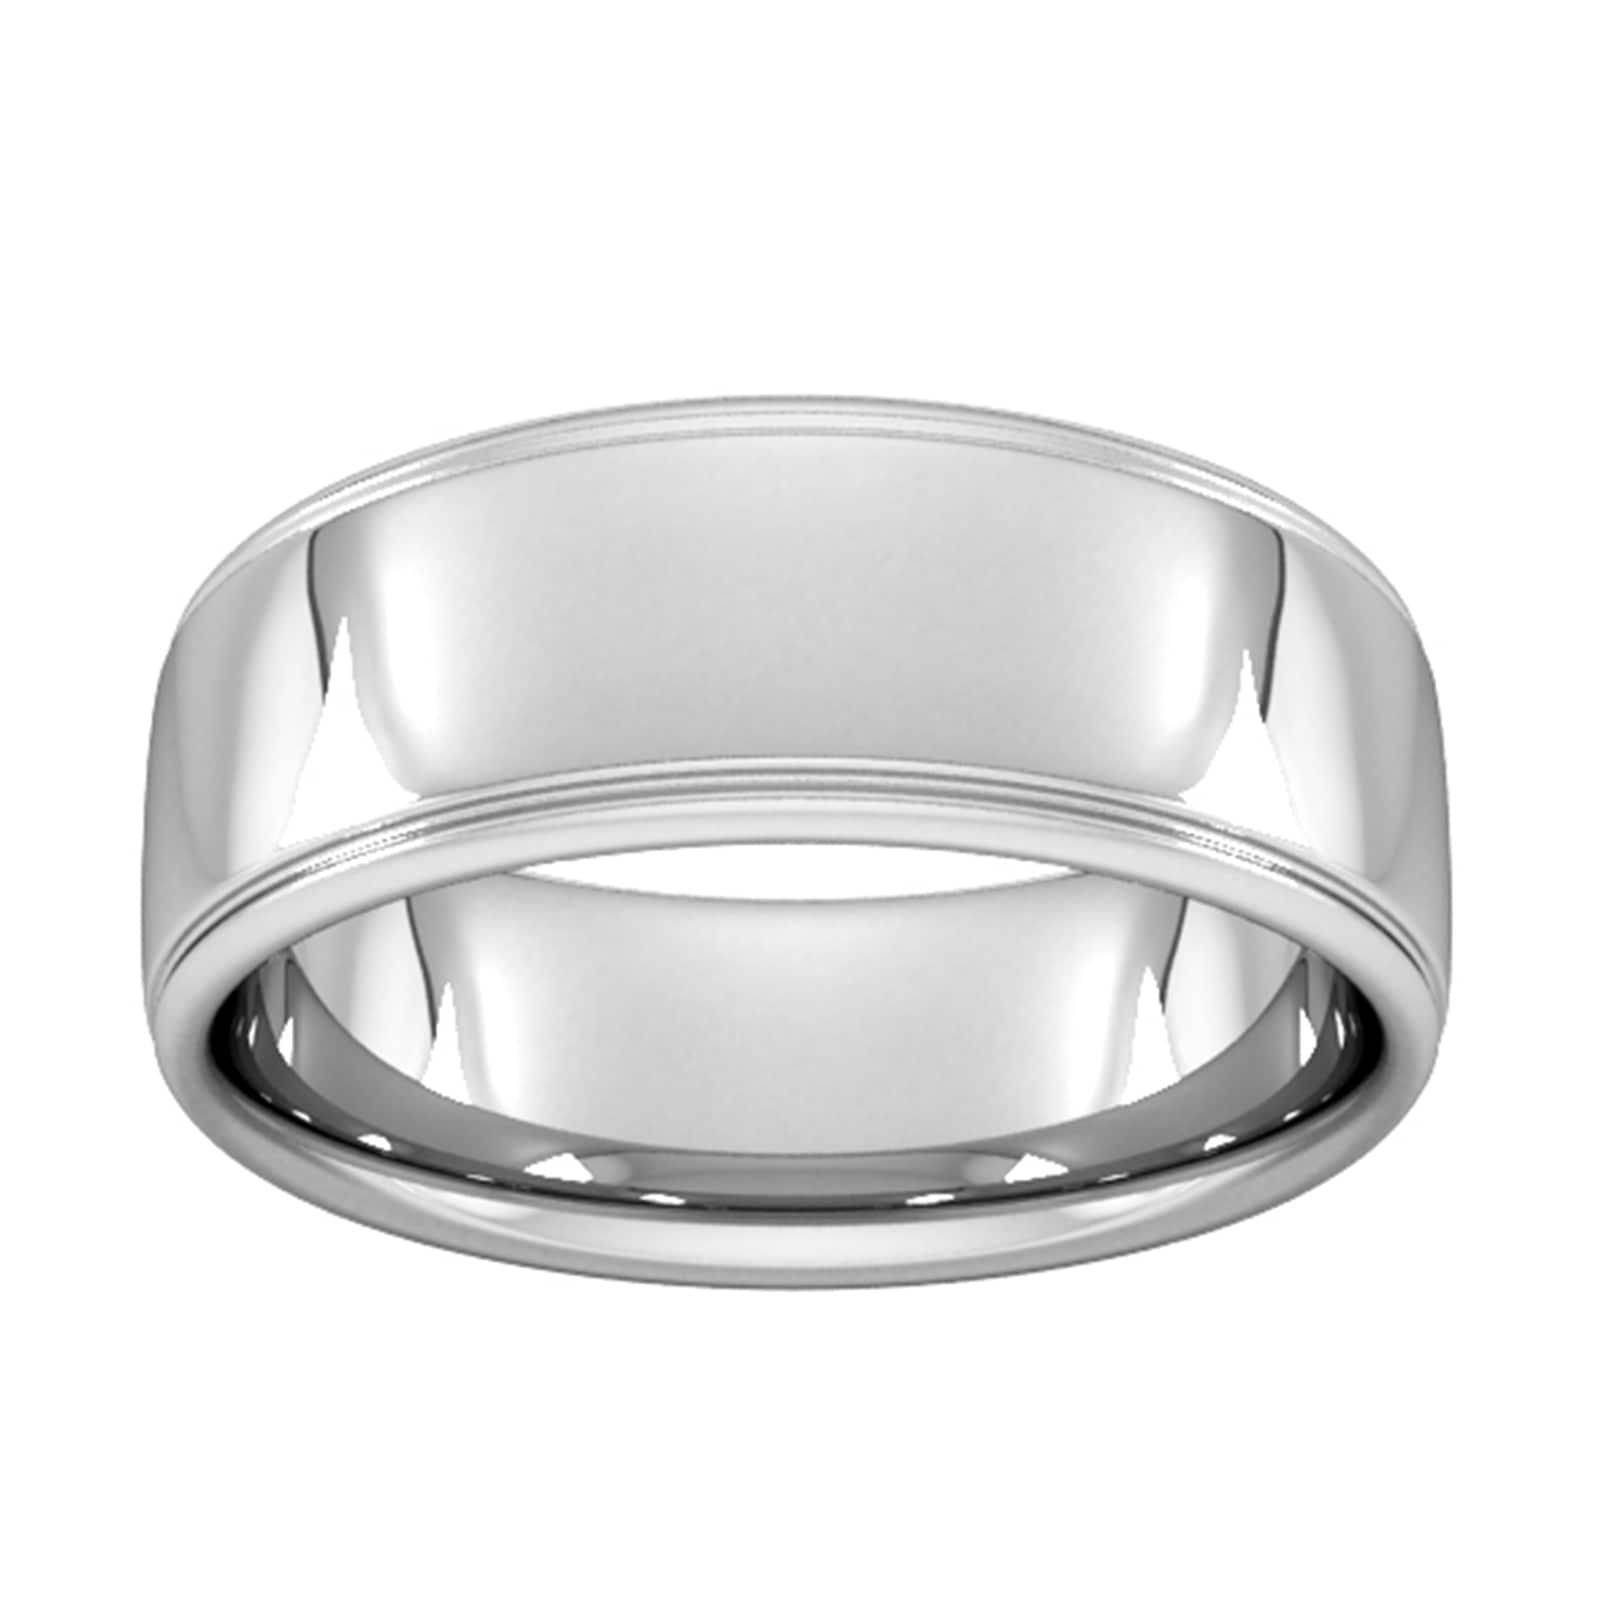 8mm Slight Court Extra Heavy Polished Finish With Grooves Wedding Ring In 18 Carat White Gold - Ring Size S